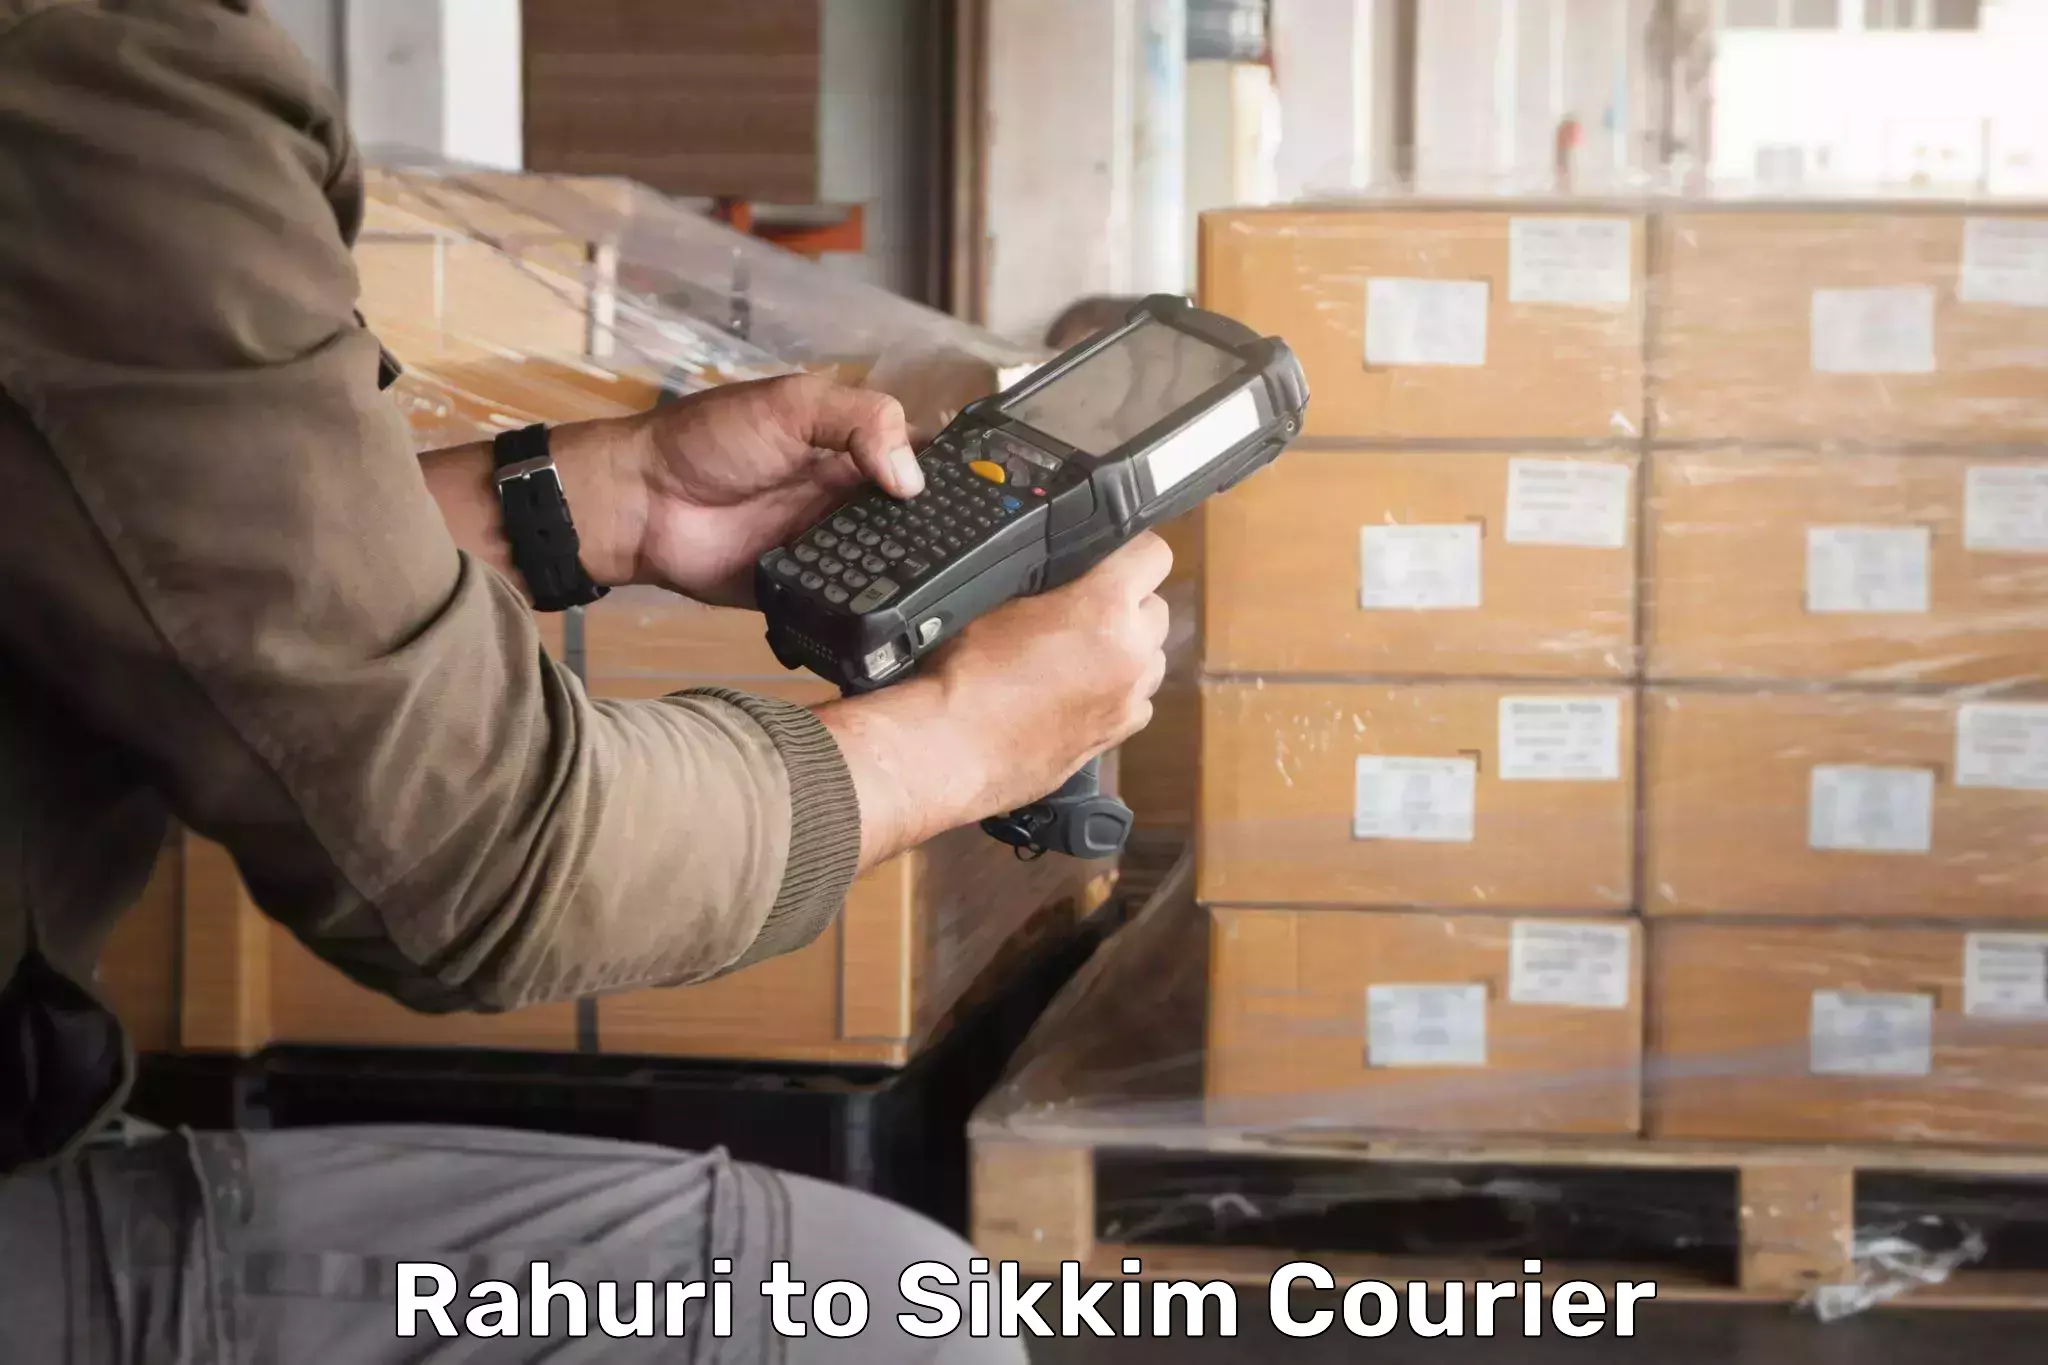 Quality courier partnerships Rahuri to Pelling